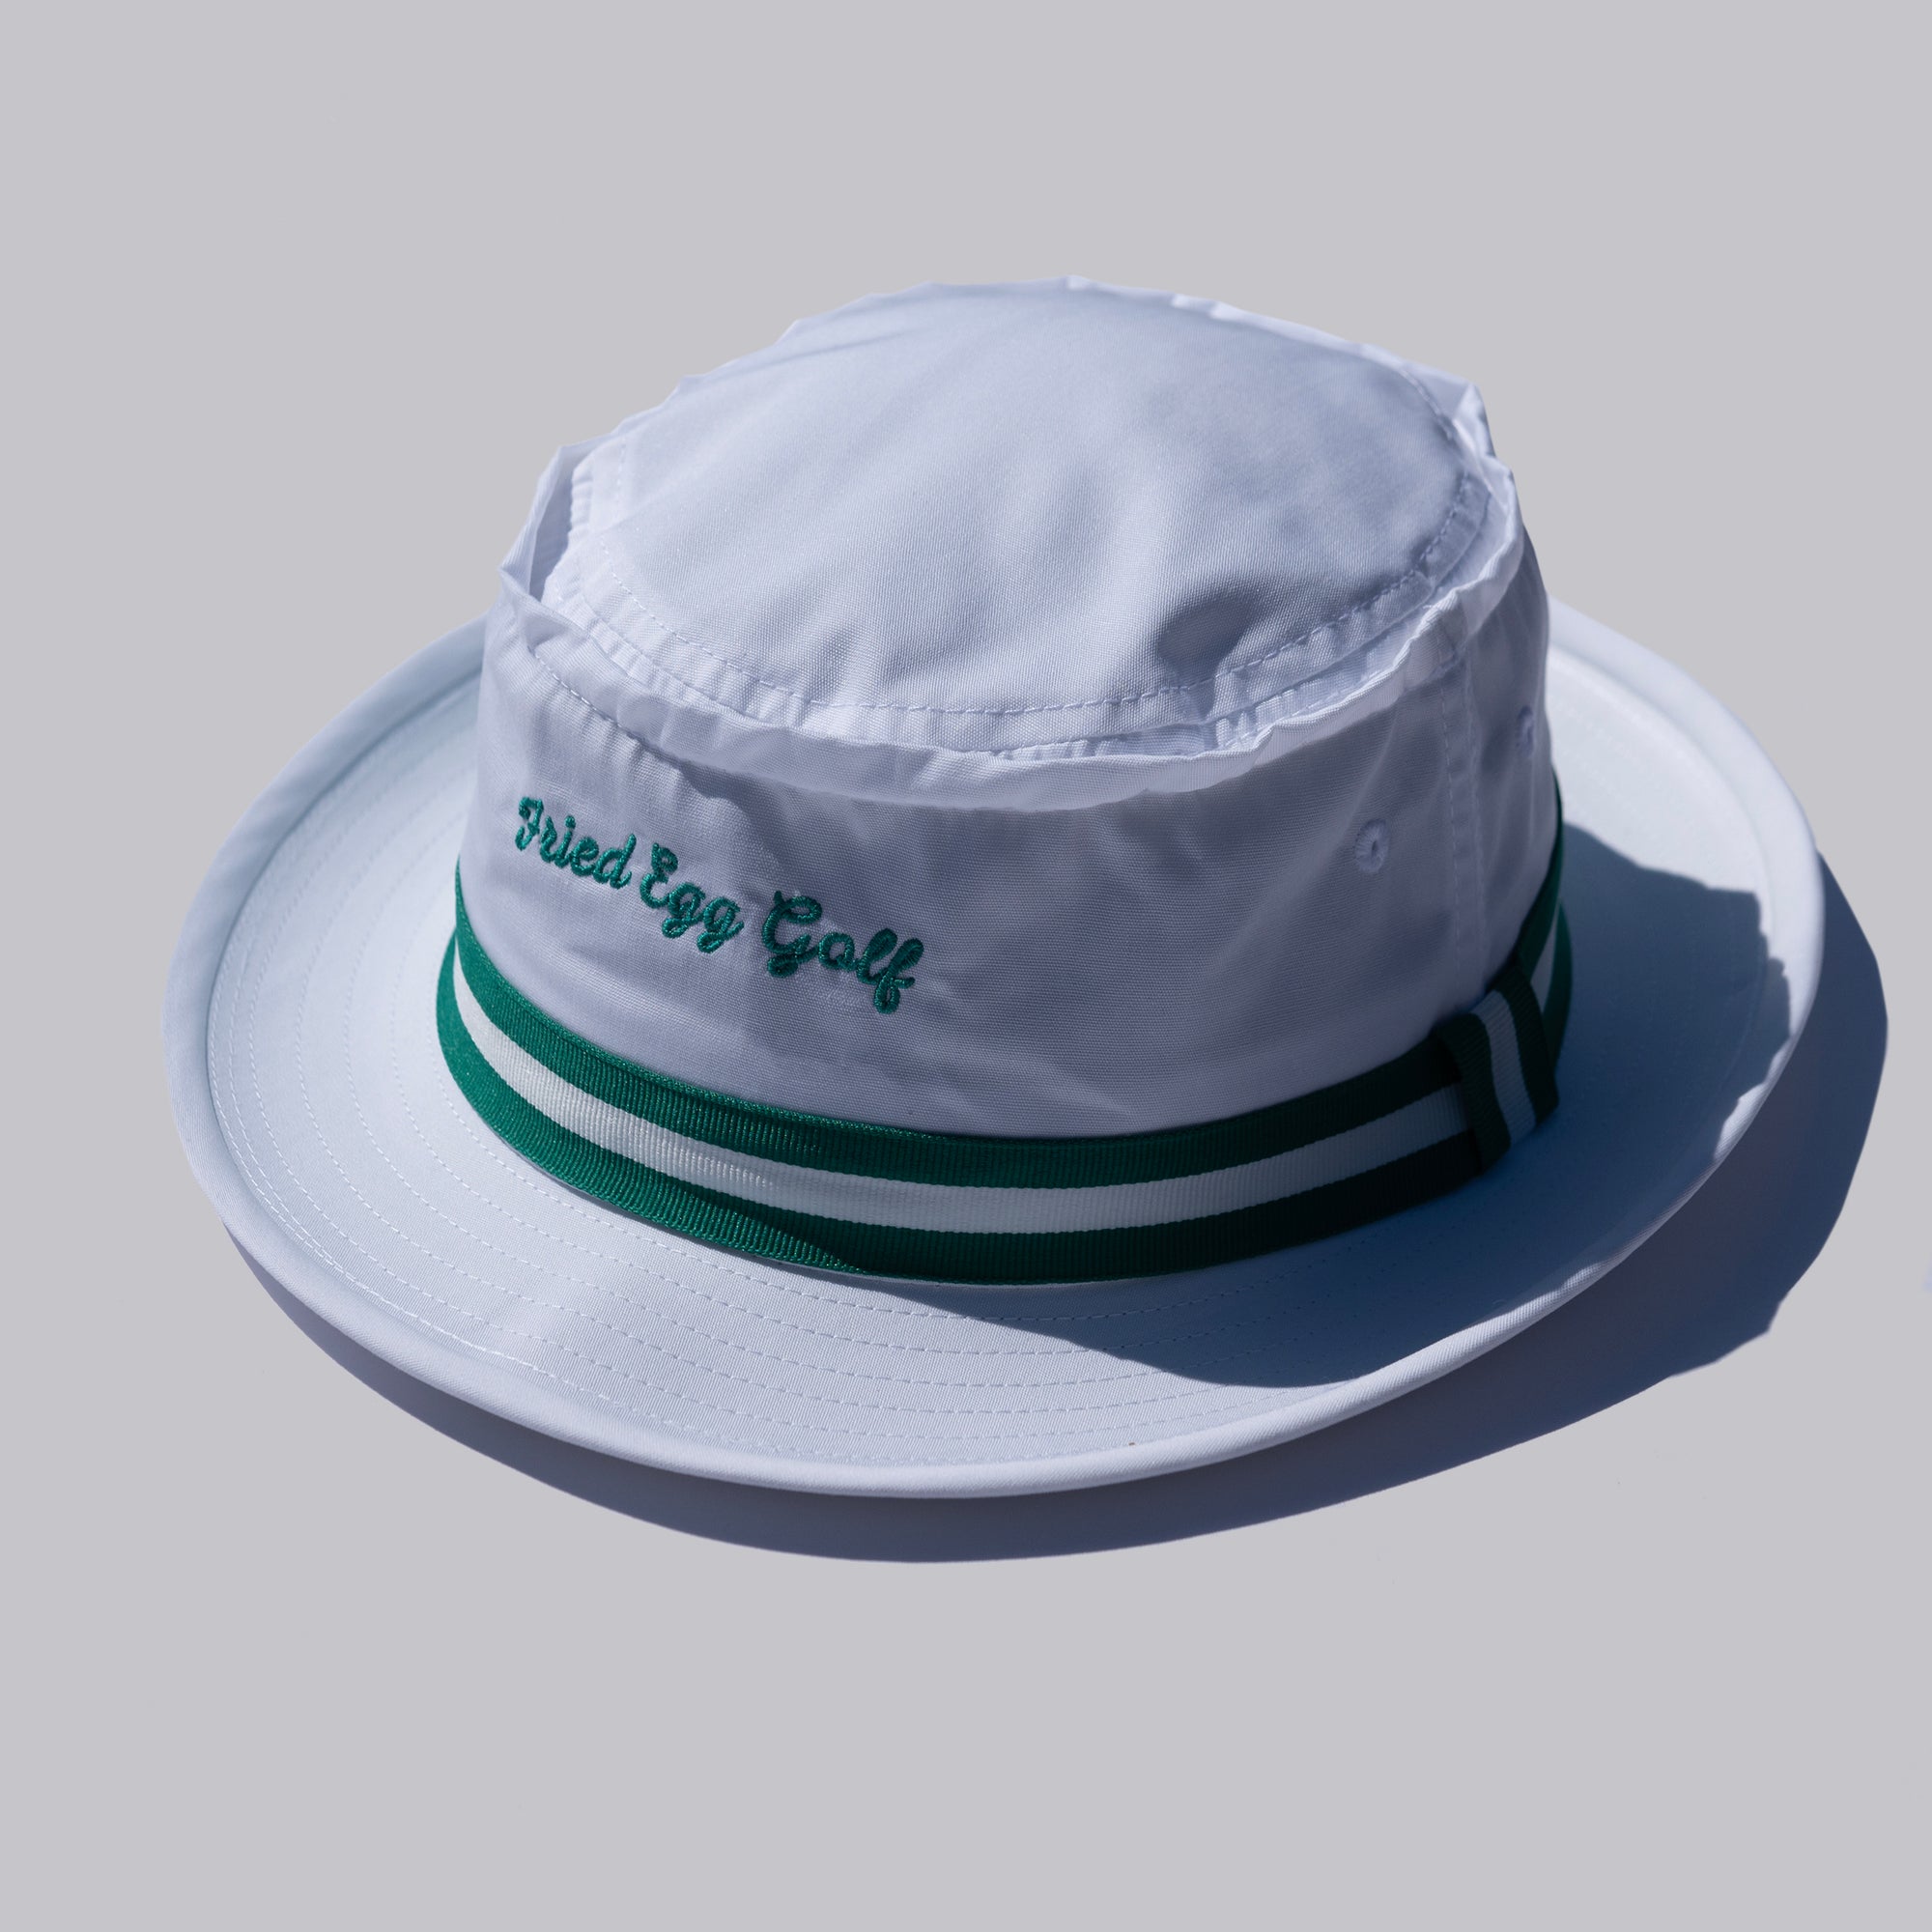 Golf Bucket and Sun Protection Hats - Fried Egg Golf